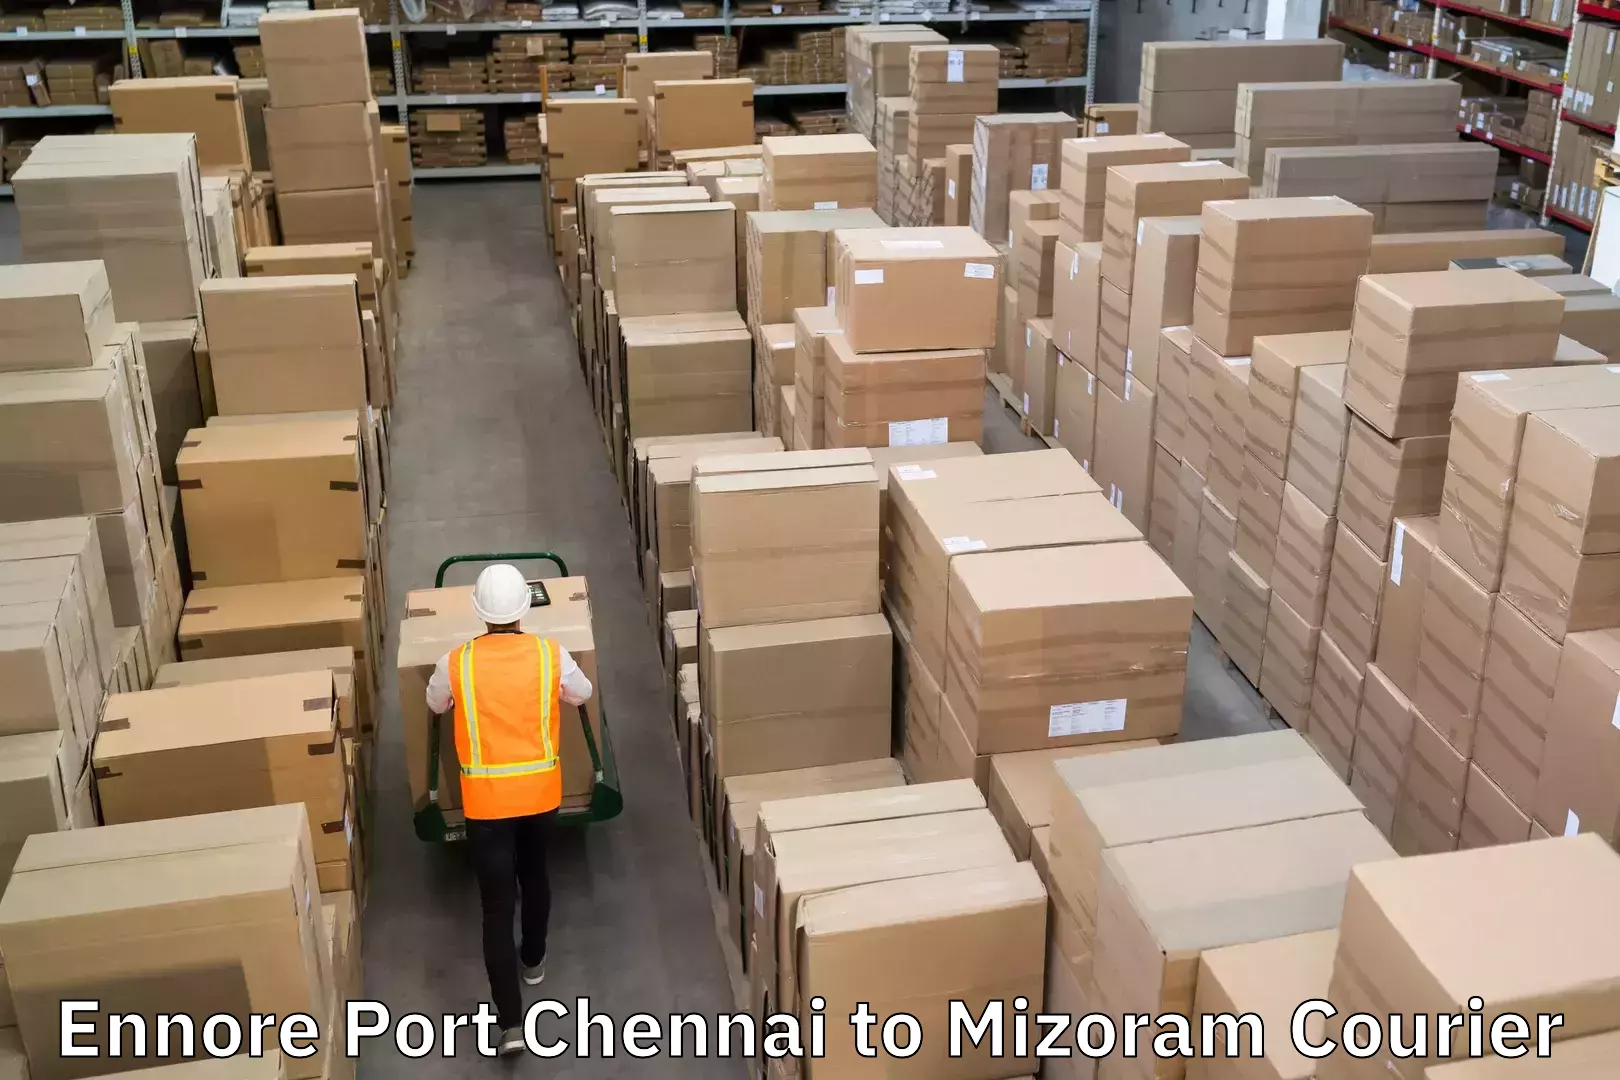 Global courier networks Ennore Port Chennai to Mizoram